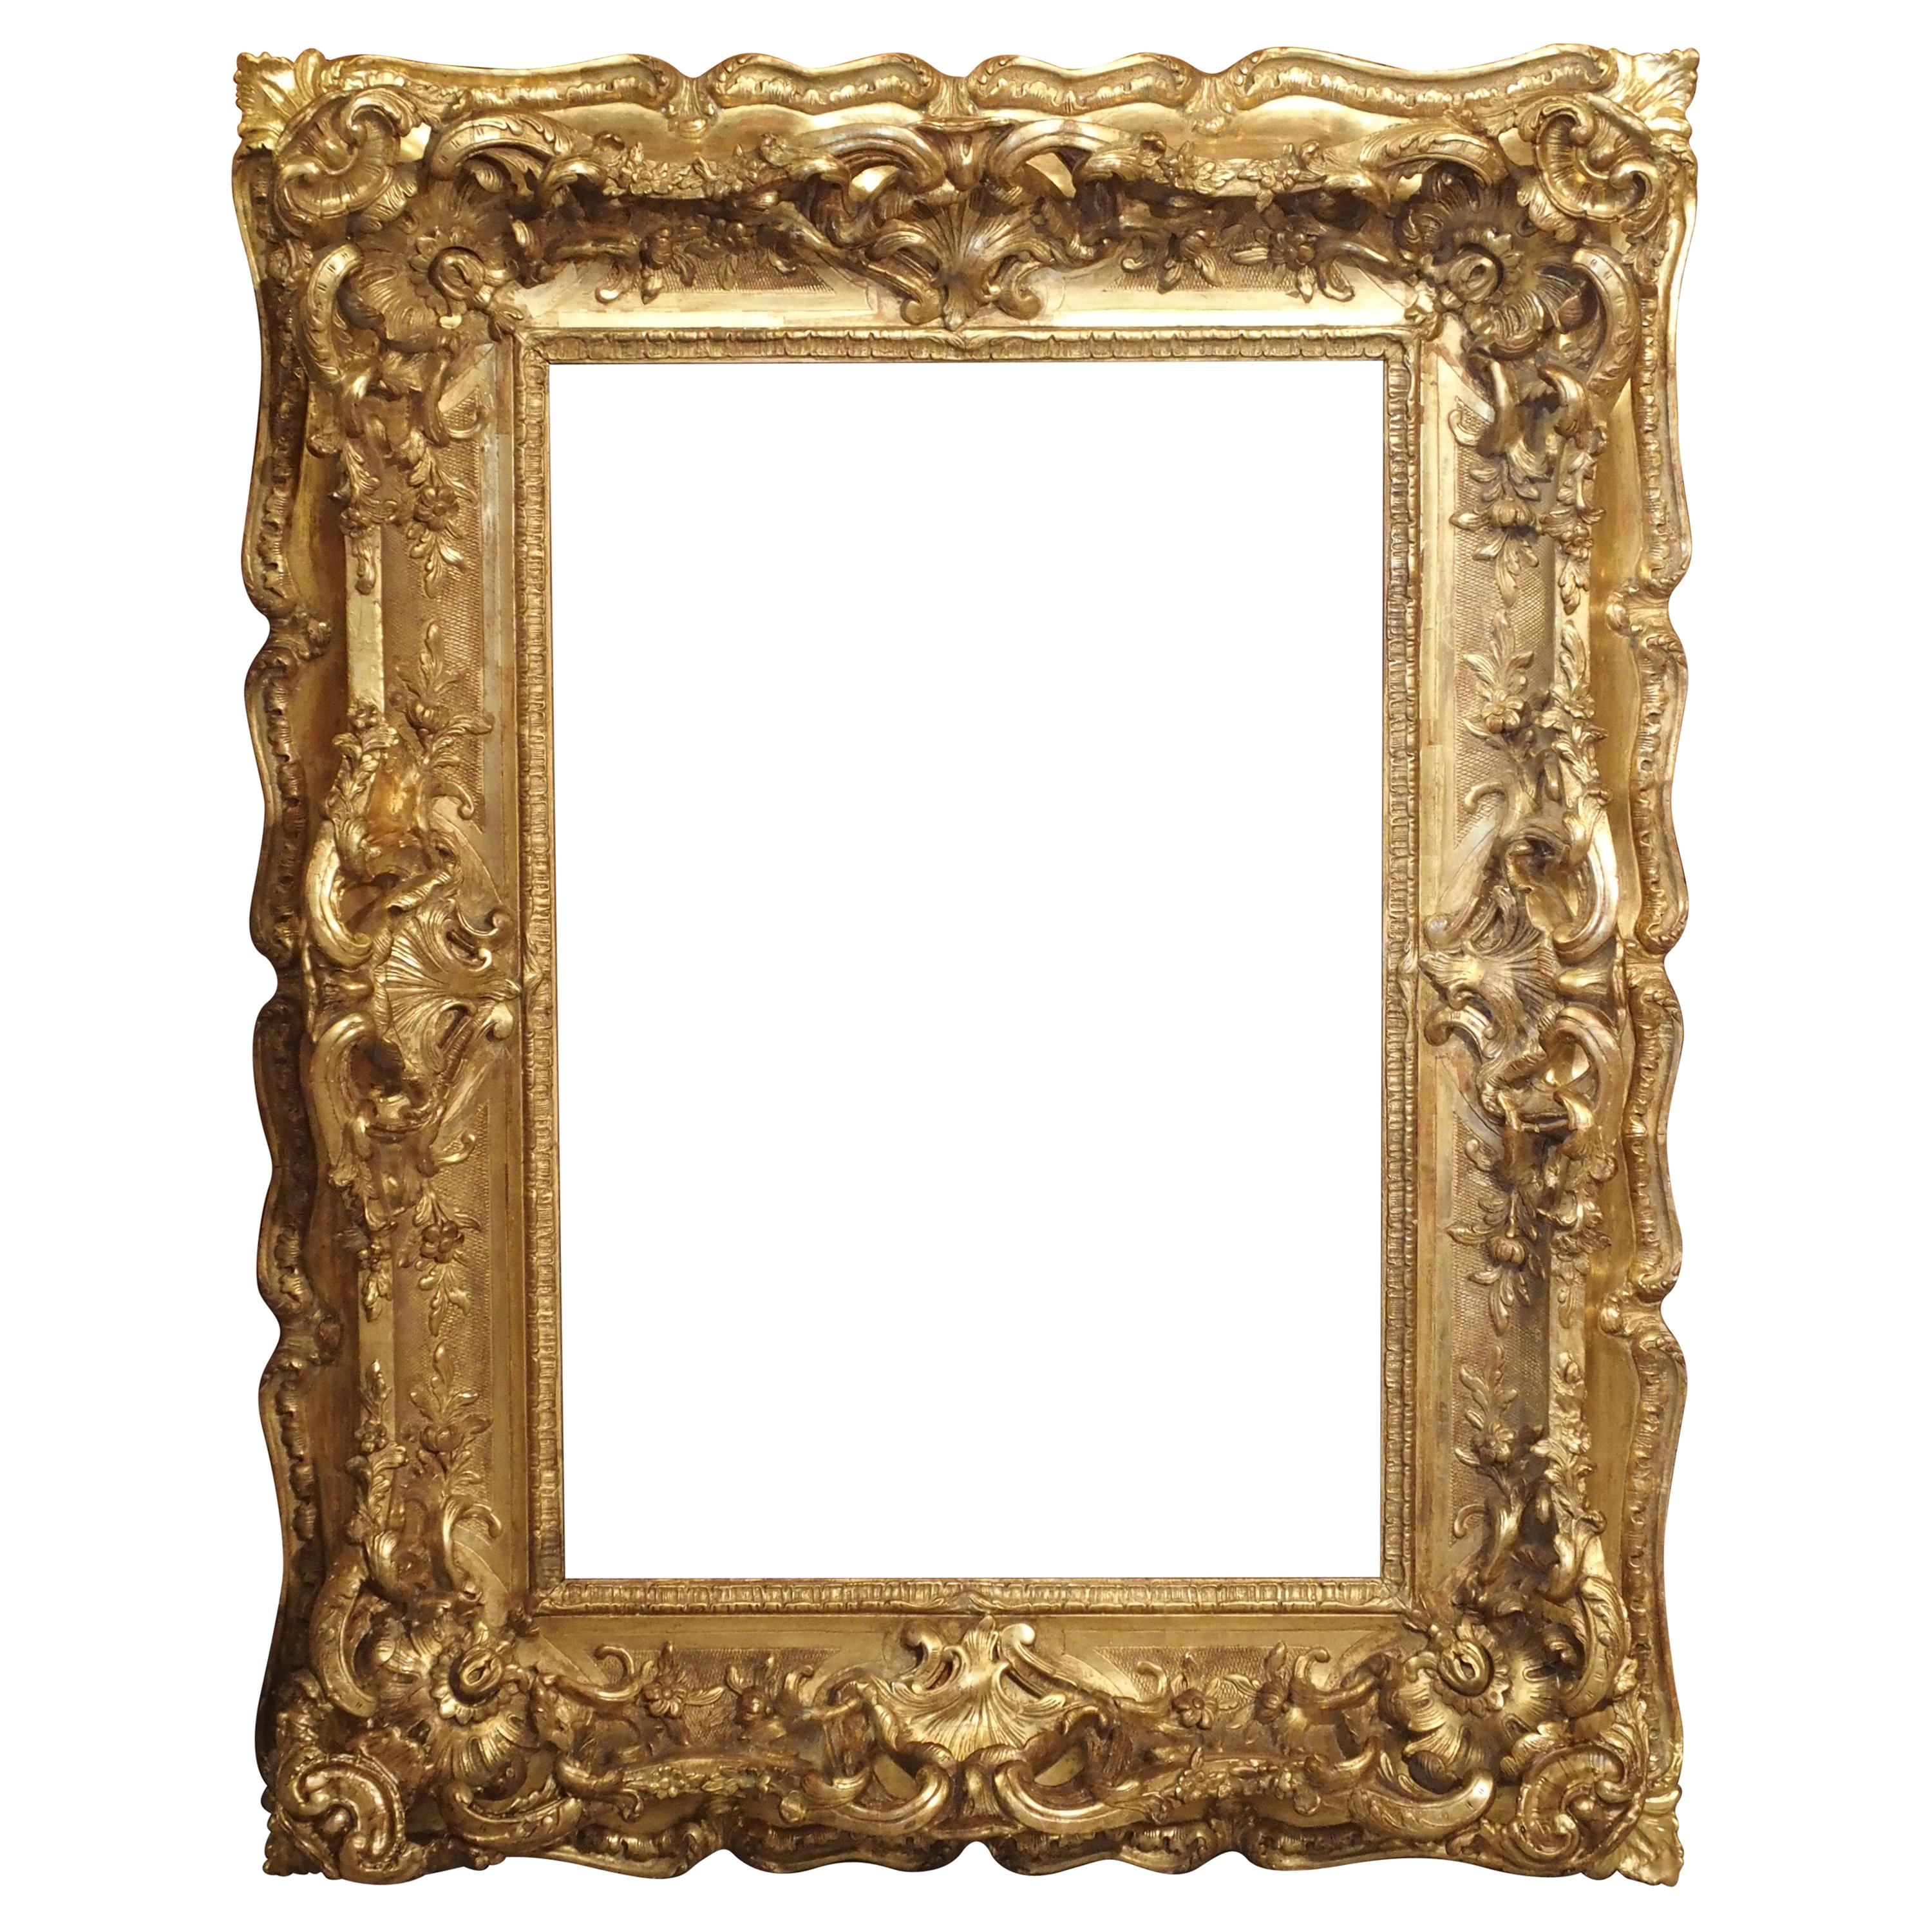 Opulent 19th Century French Louis XV Style Gold Leaf, Giltwood and Plaster Frame